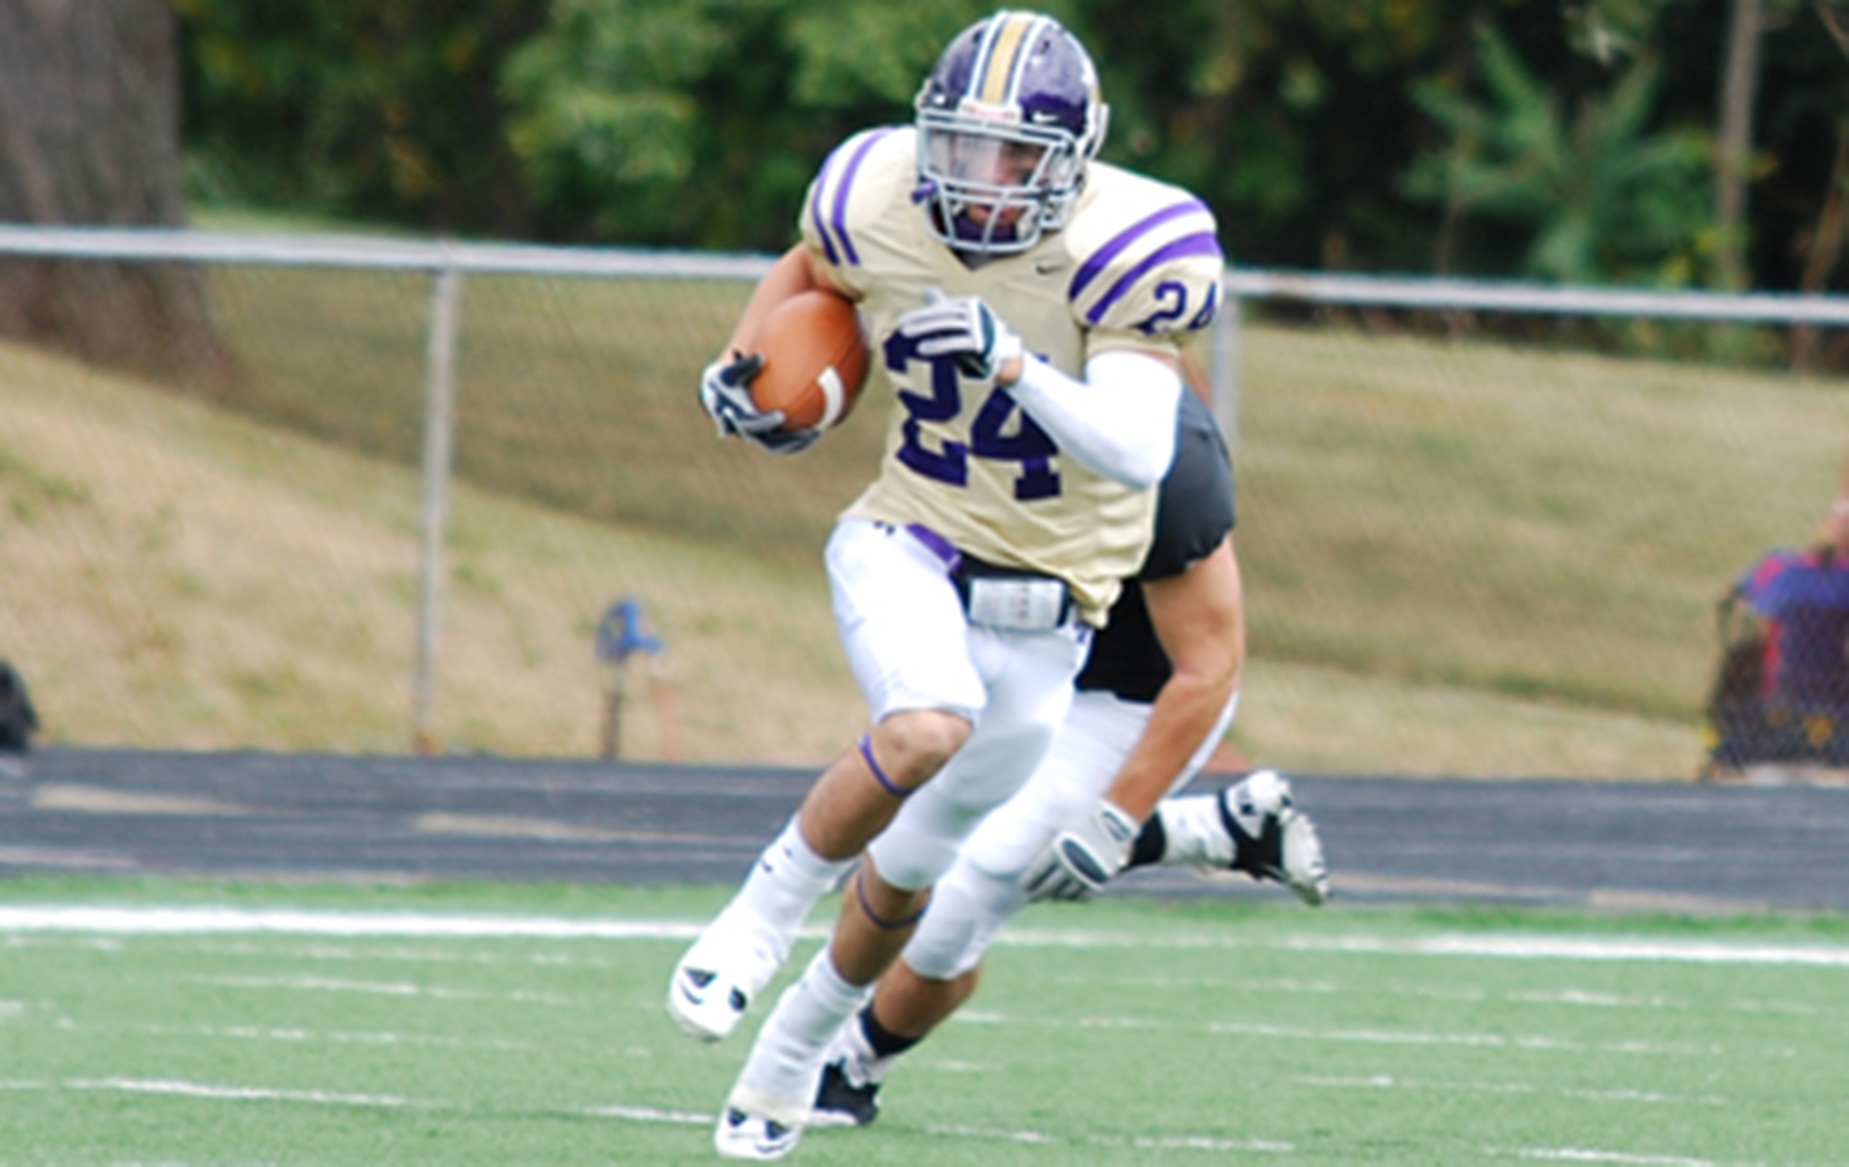 Defiance Throttles Earlham, 33-0, in First-Ever HCAC Meeting